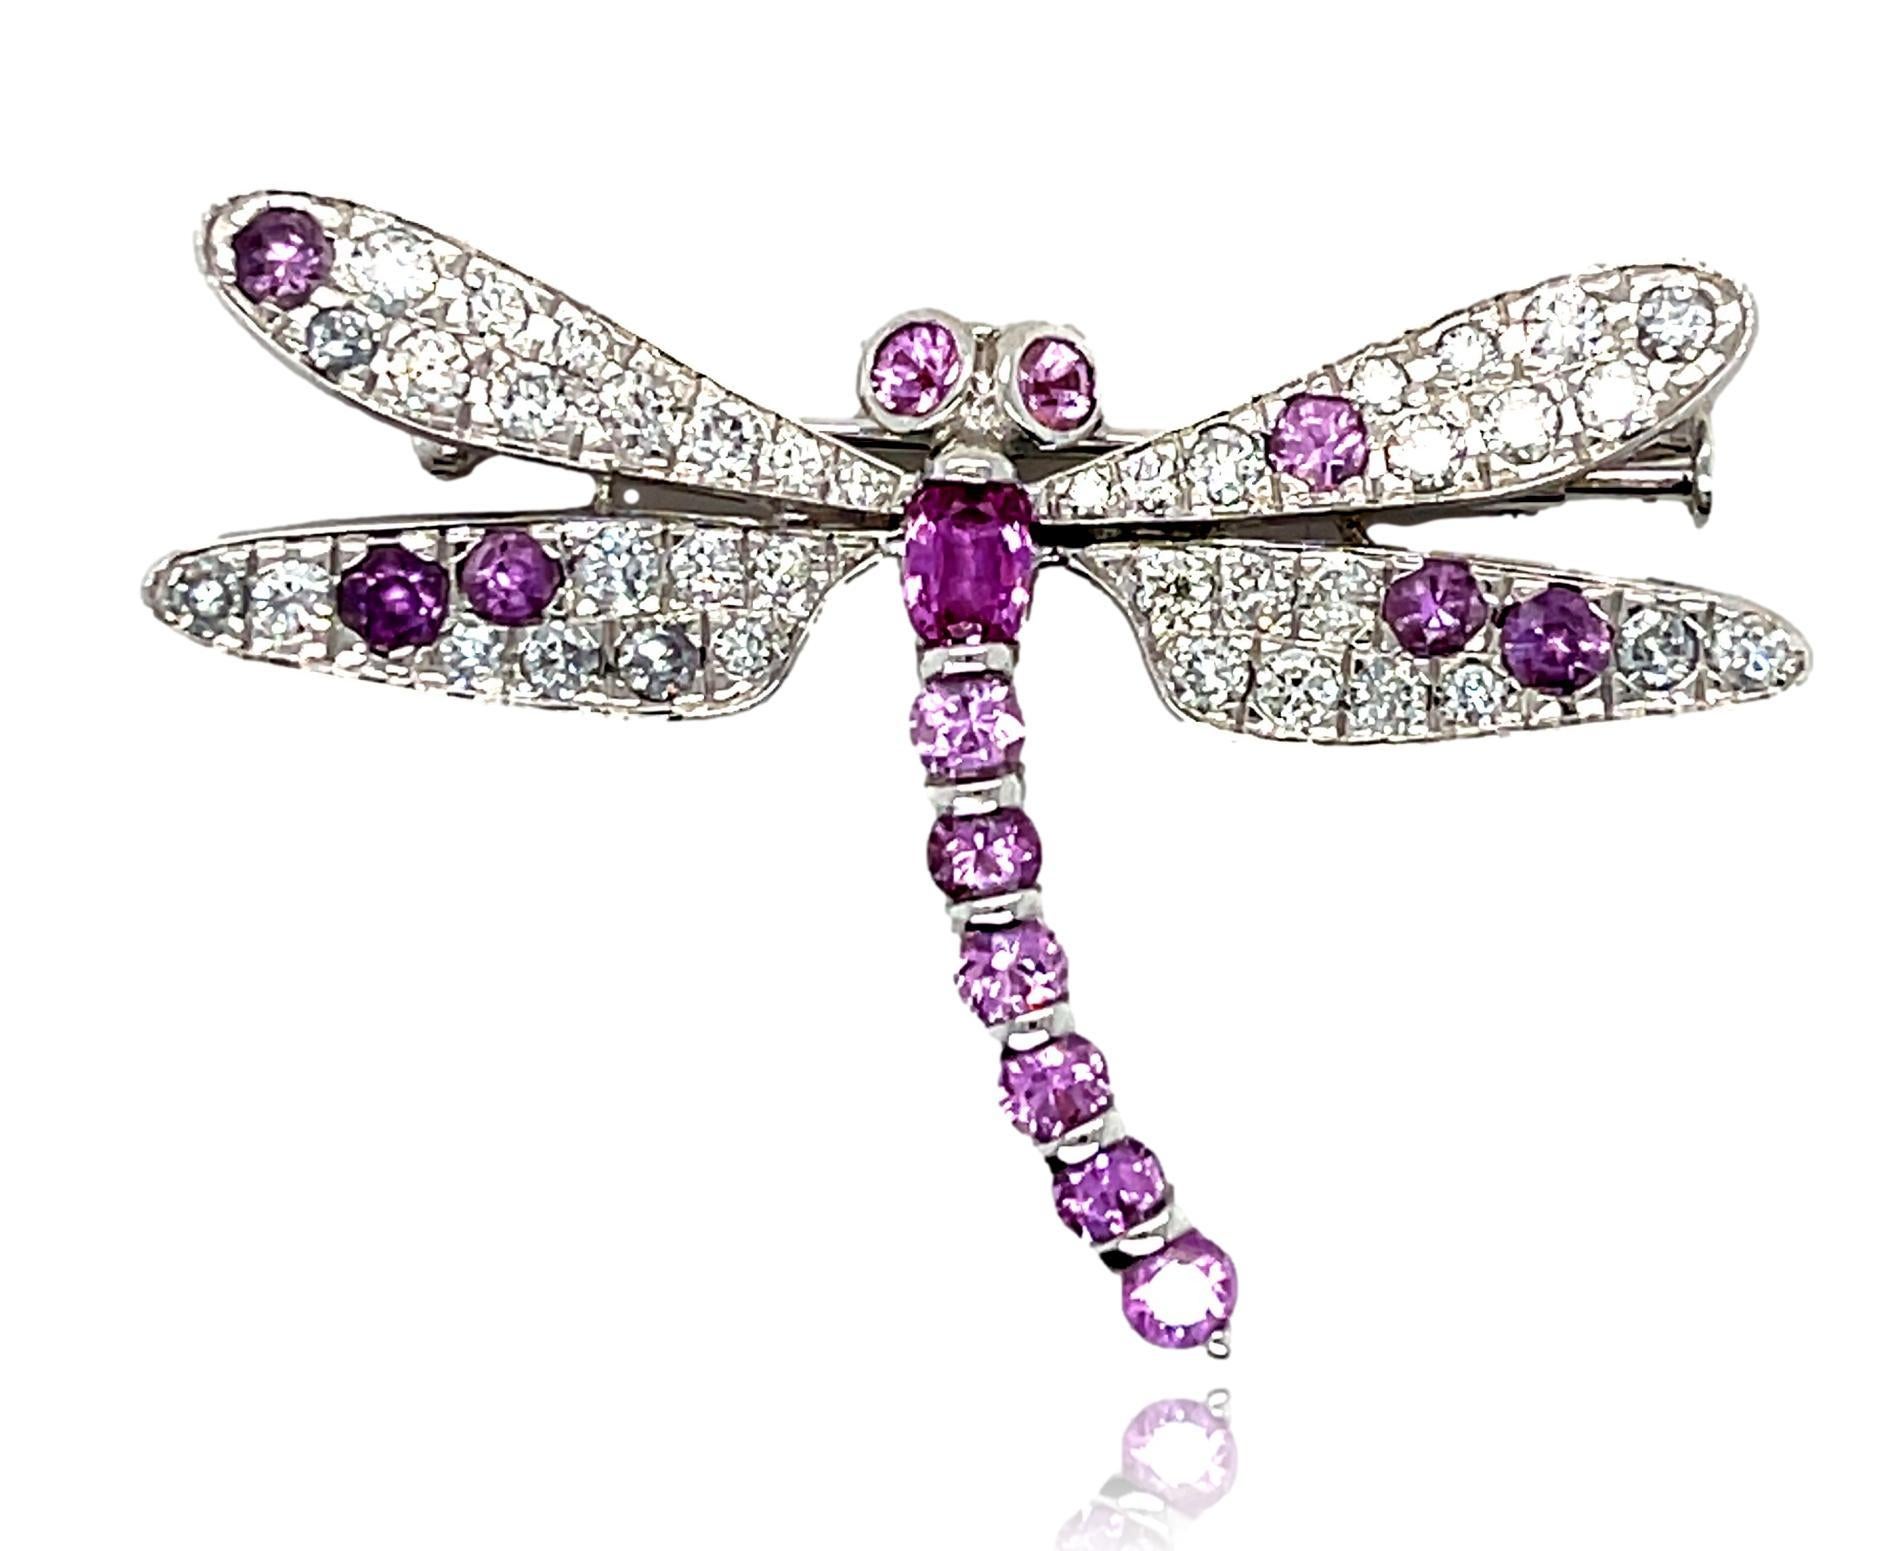 This stunning Butterfly Brooch is the perfect accent to wear at that cocktail event. It has 1 carats of sparkling diamonds and beautiful top quality Pink Sapphires all set in 18K white gold. It has a pull lock for extra security. This brooch comes